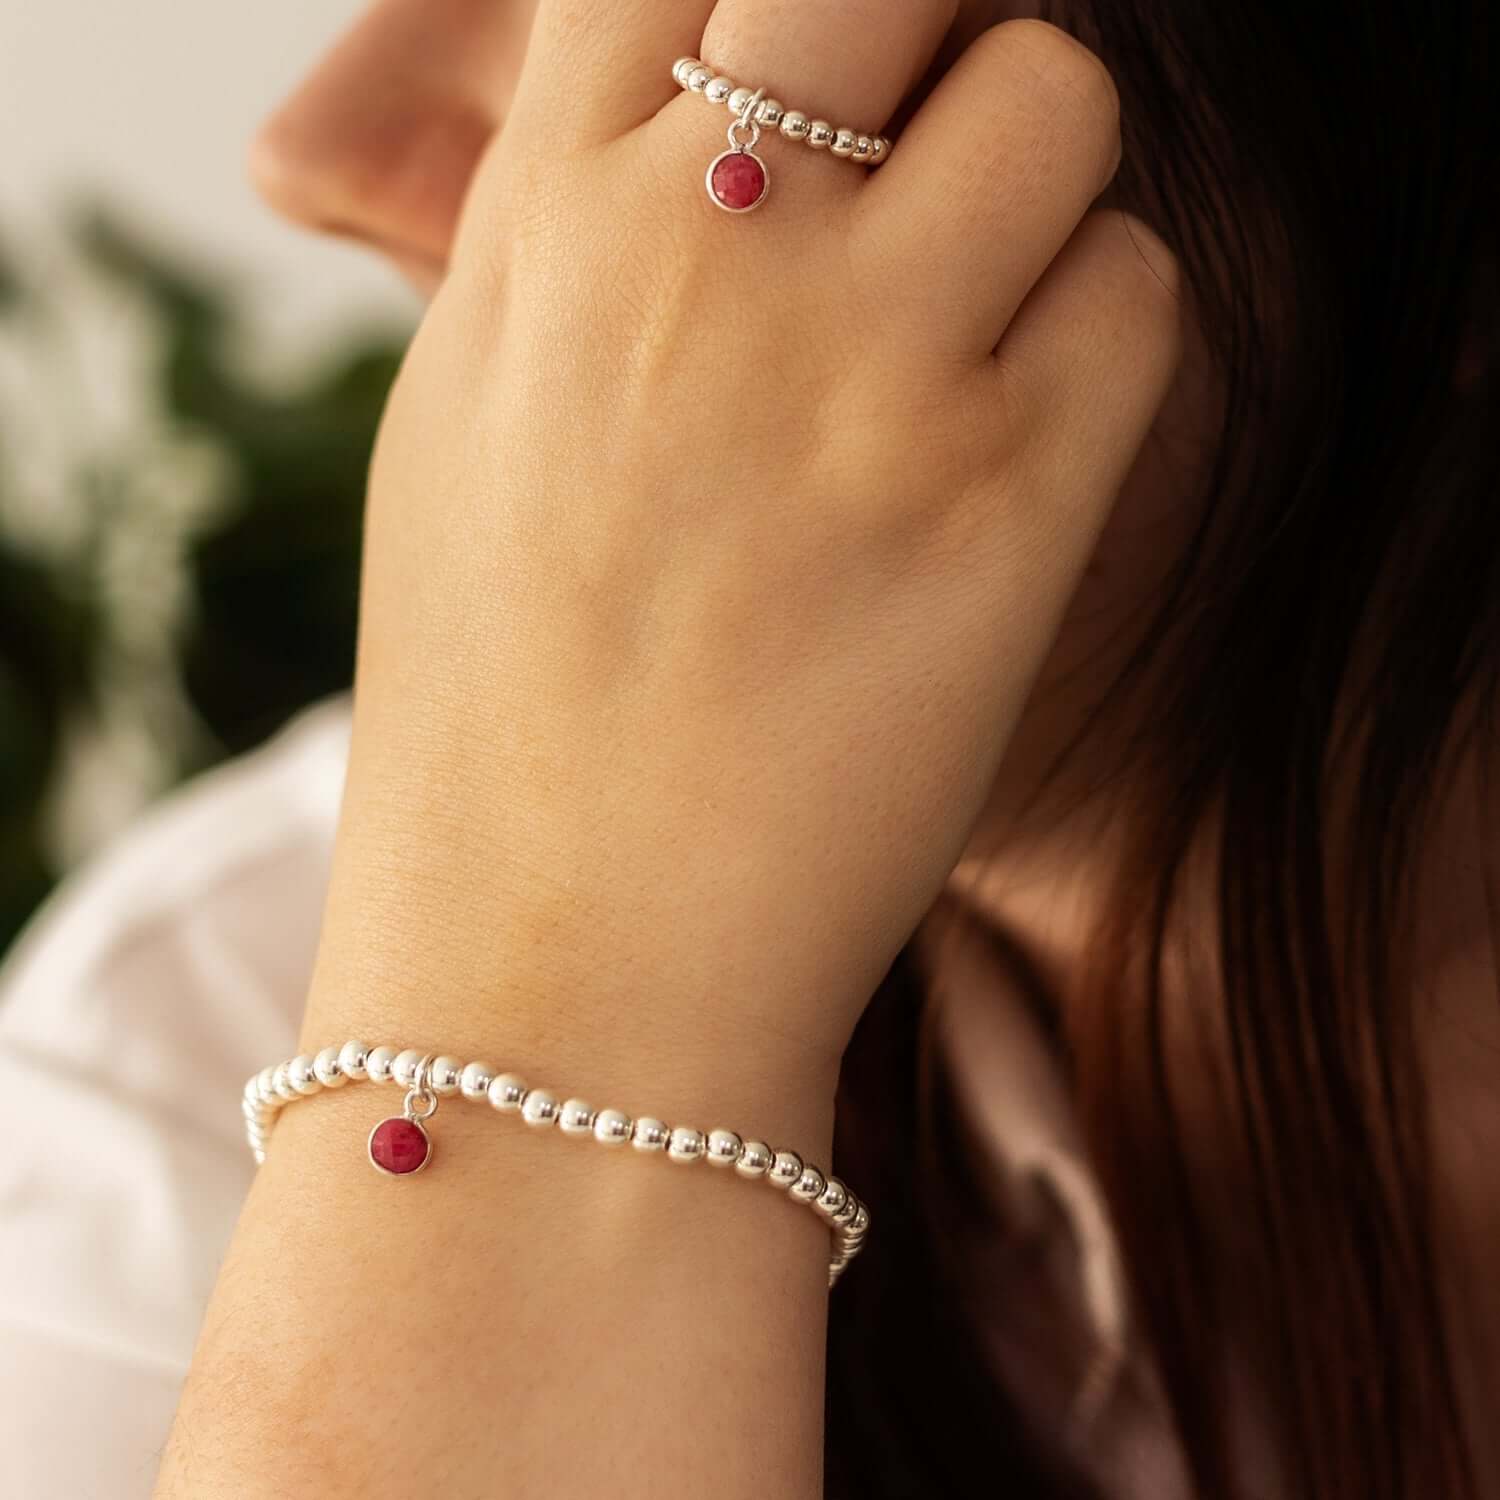   A close-up image of a person with their hand near their face, showcasing a matching beaded bracelet and ring. Both the bracelet and ring feature round, red gemstone charms, highlighting the elegance of ruby birthstone jewellery. 